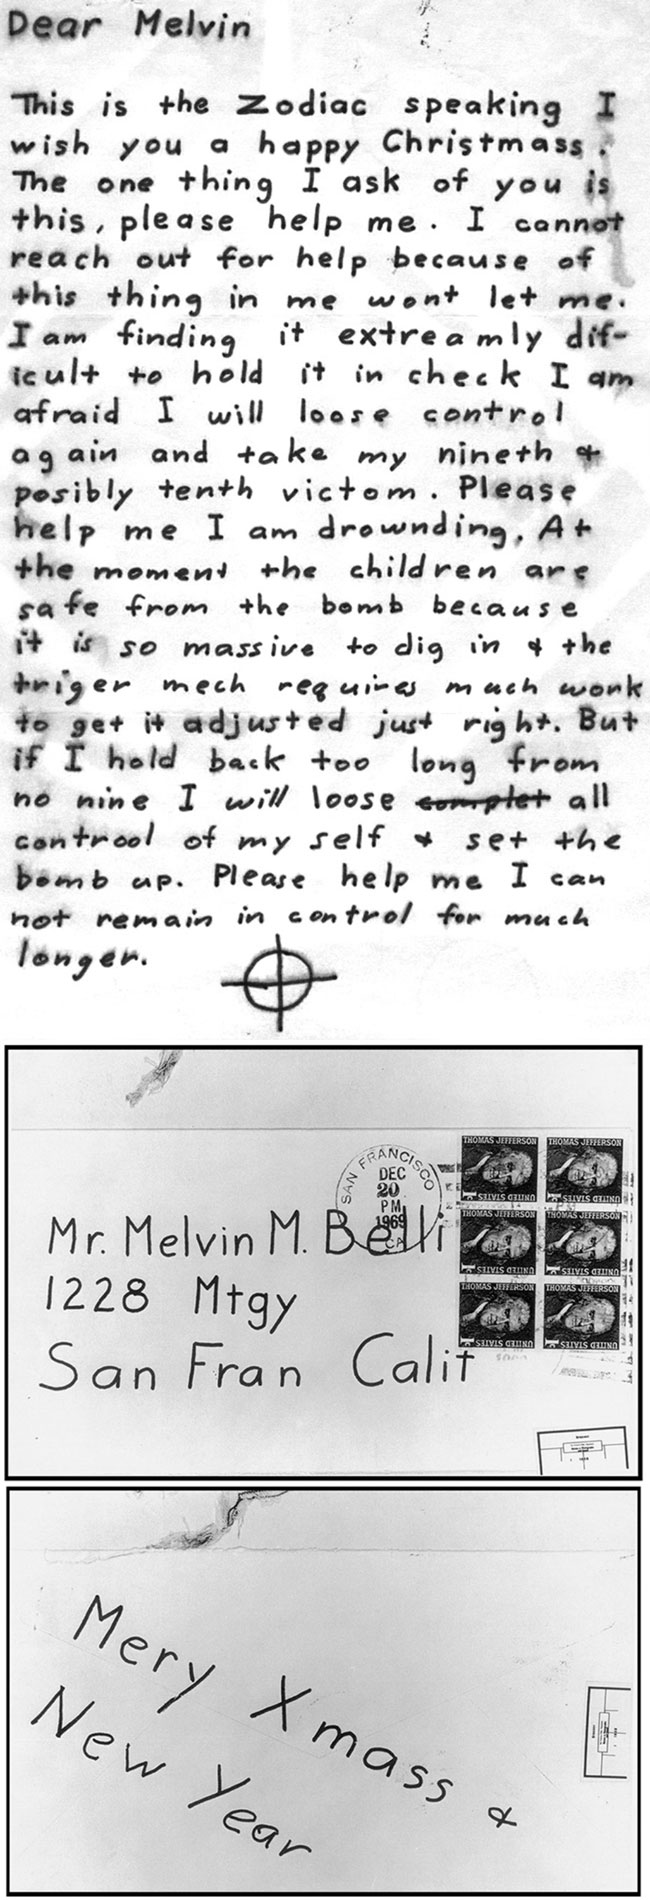 08-Letter-to-atty-Melvin-Belli-postmarked-Dec-20-69